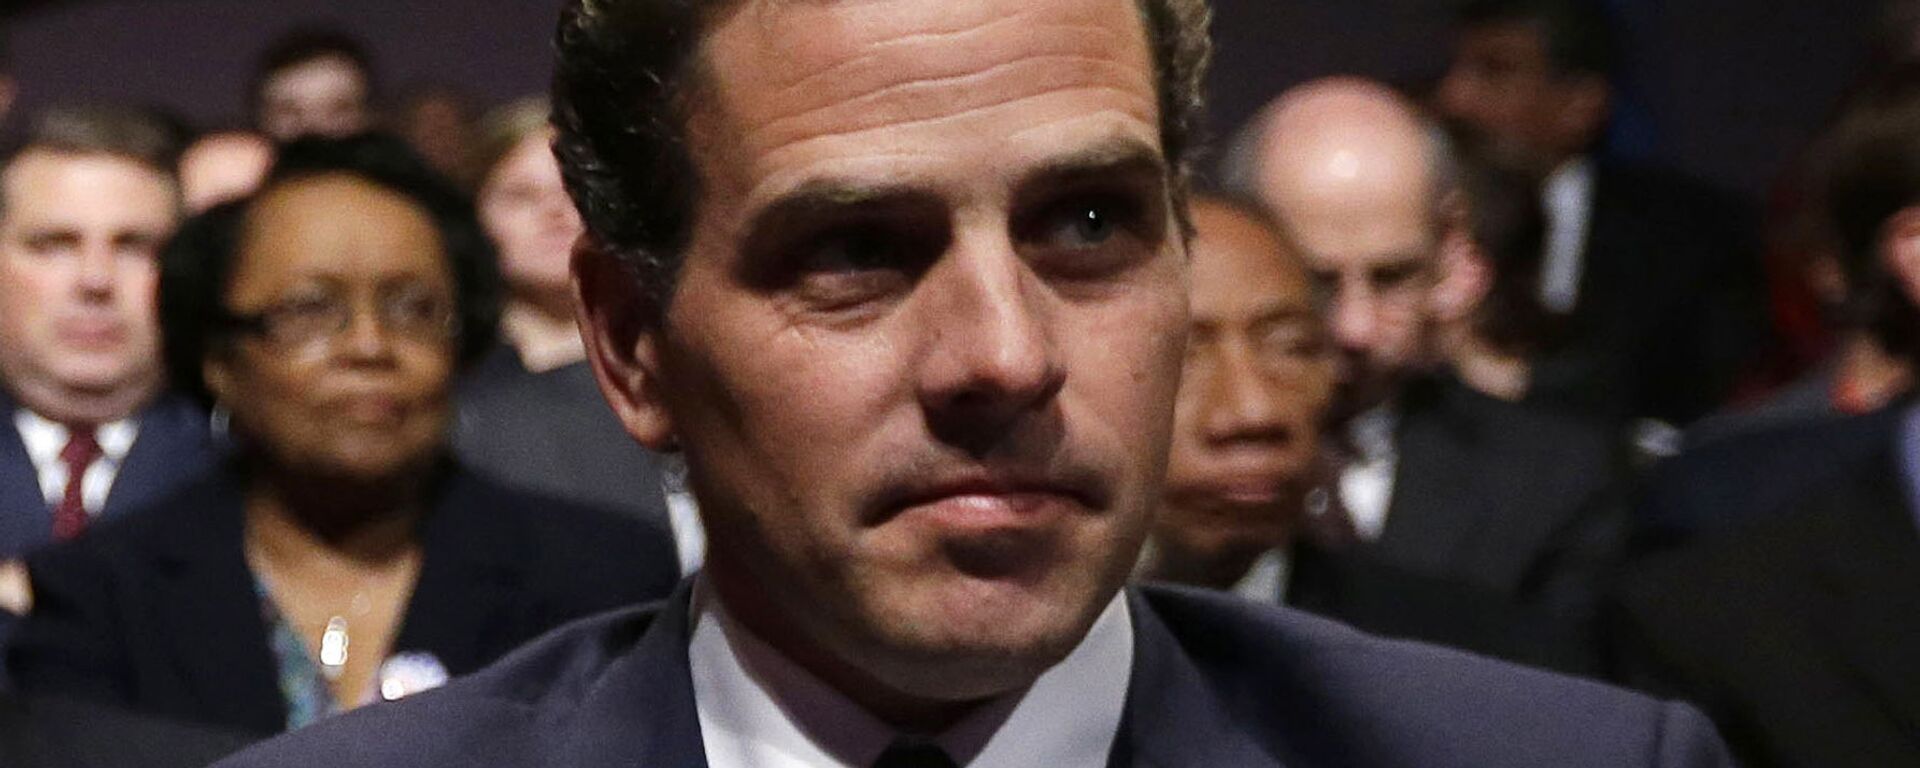 In this Oct. 11, 2012, file photo, Hunter Biden waits for the start of the his father's, Vice President Joe Biden's, debate at Centre College in Danville, Ky. In 2014, then-Vice President Joe Biden was at the forefront of American diplomatic efforts to support Ukraine's fragile democratic government as it sought to fend off Russian aggression and root out corruption. So it raised eyebrows when Biden's son Hunter was hired by a Ukrainian gas company. President Donald Trump prodded Ukraine's president to help him investigate any corruption related to Joe Biden, now one of the top Democrats seeking to defeat Trump in 2020. - Sputnik International, 1920, 31.01.2023